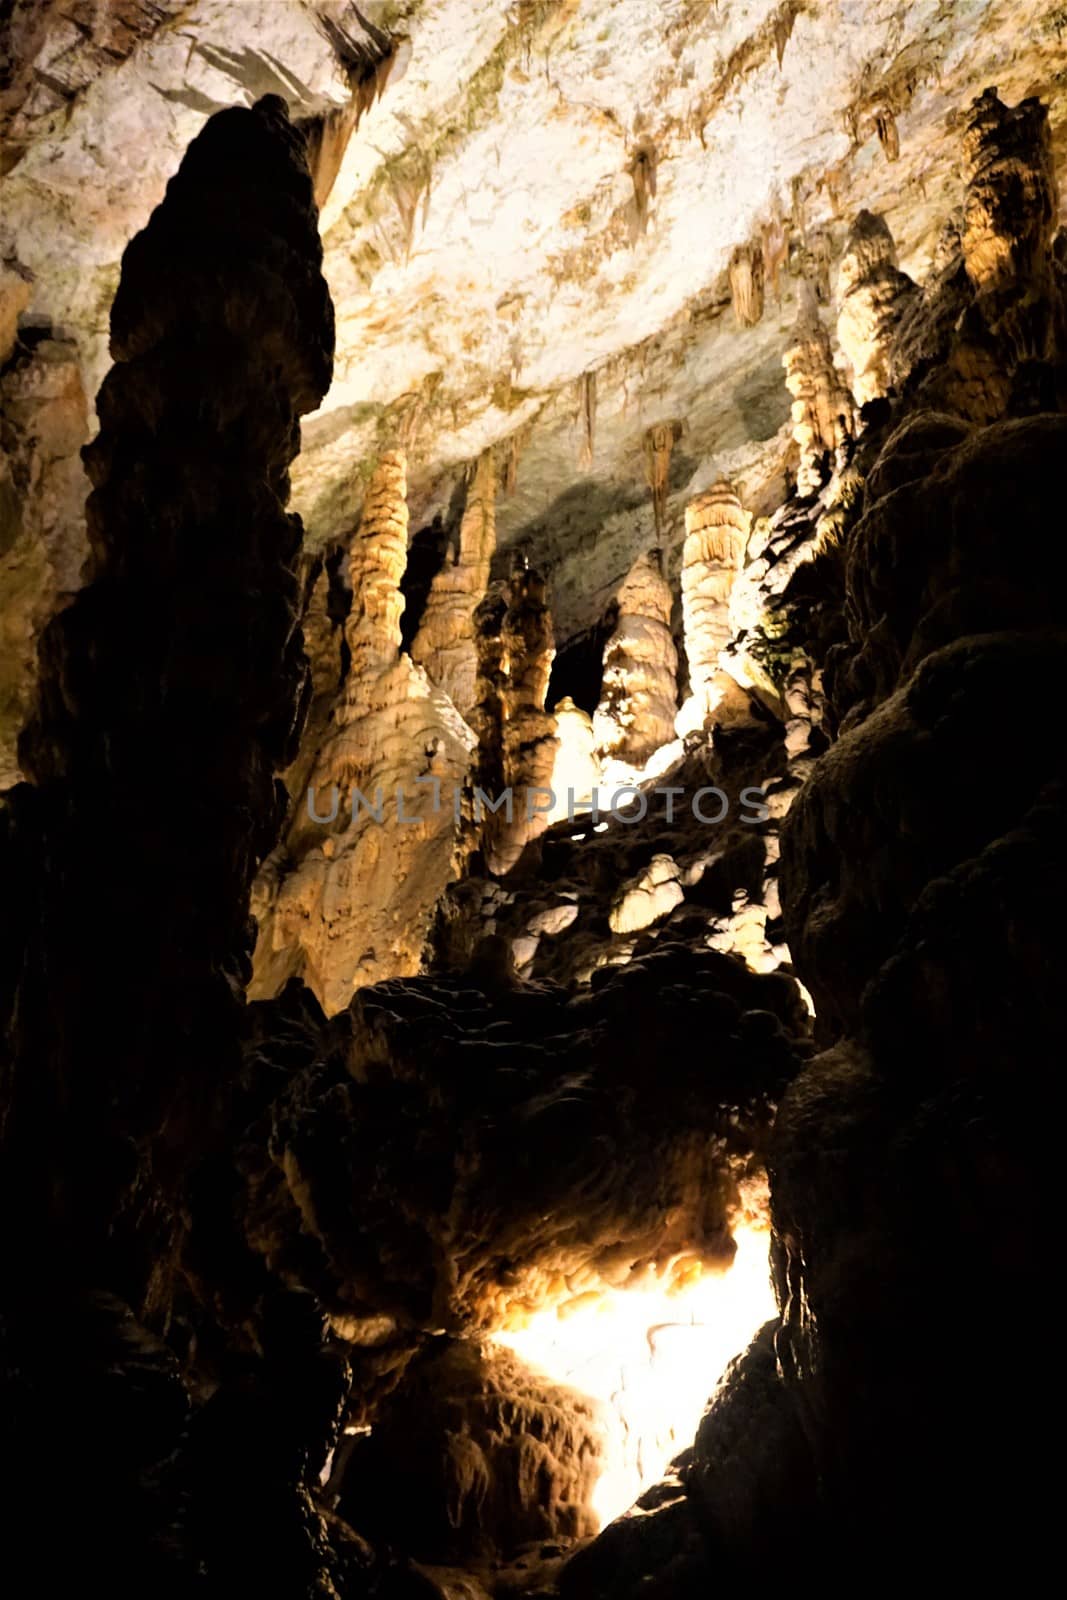 Impressive dripstone colums from hell in the Postojna caves by pisces2386